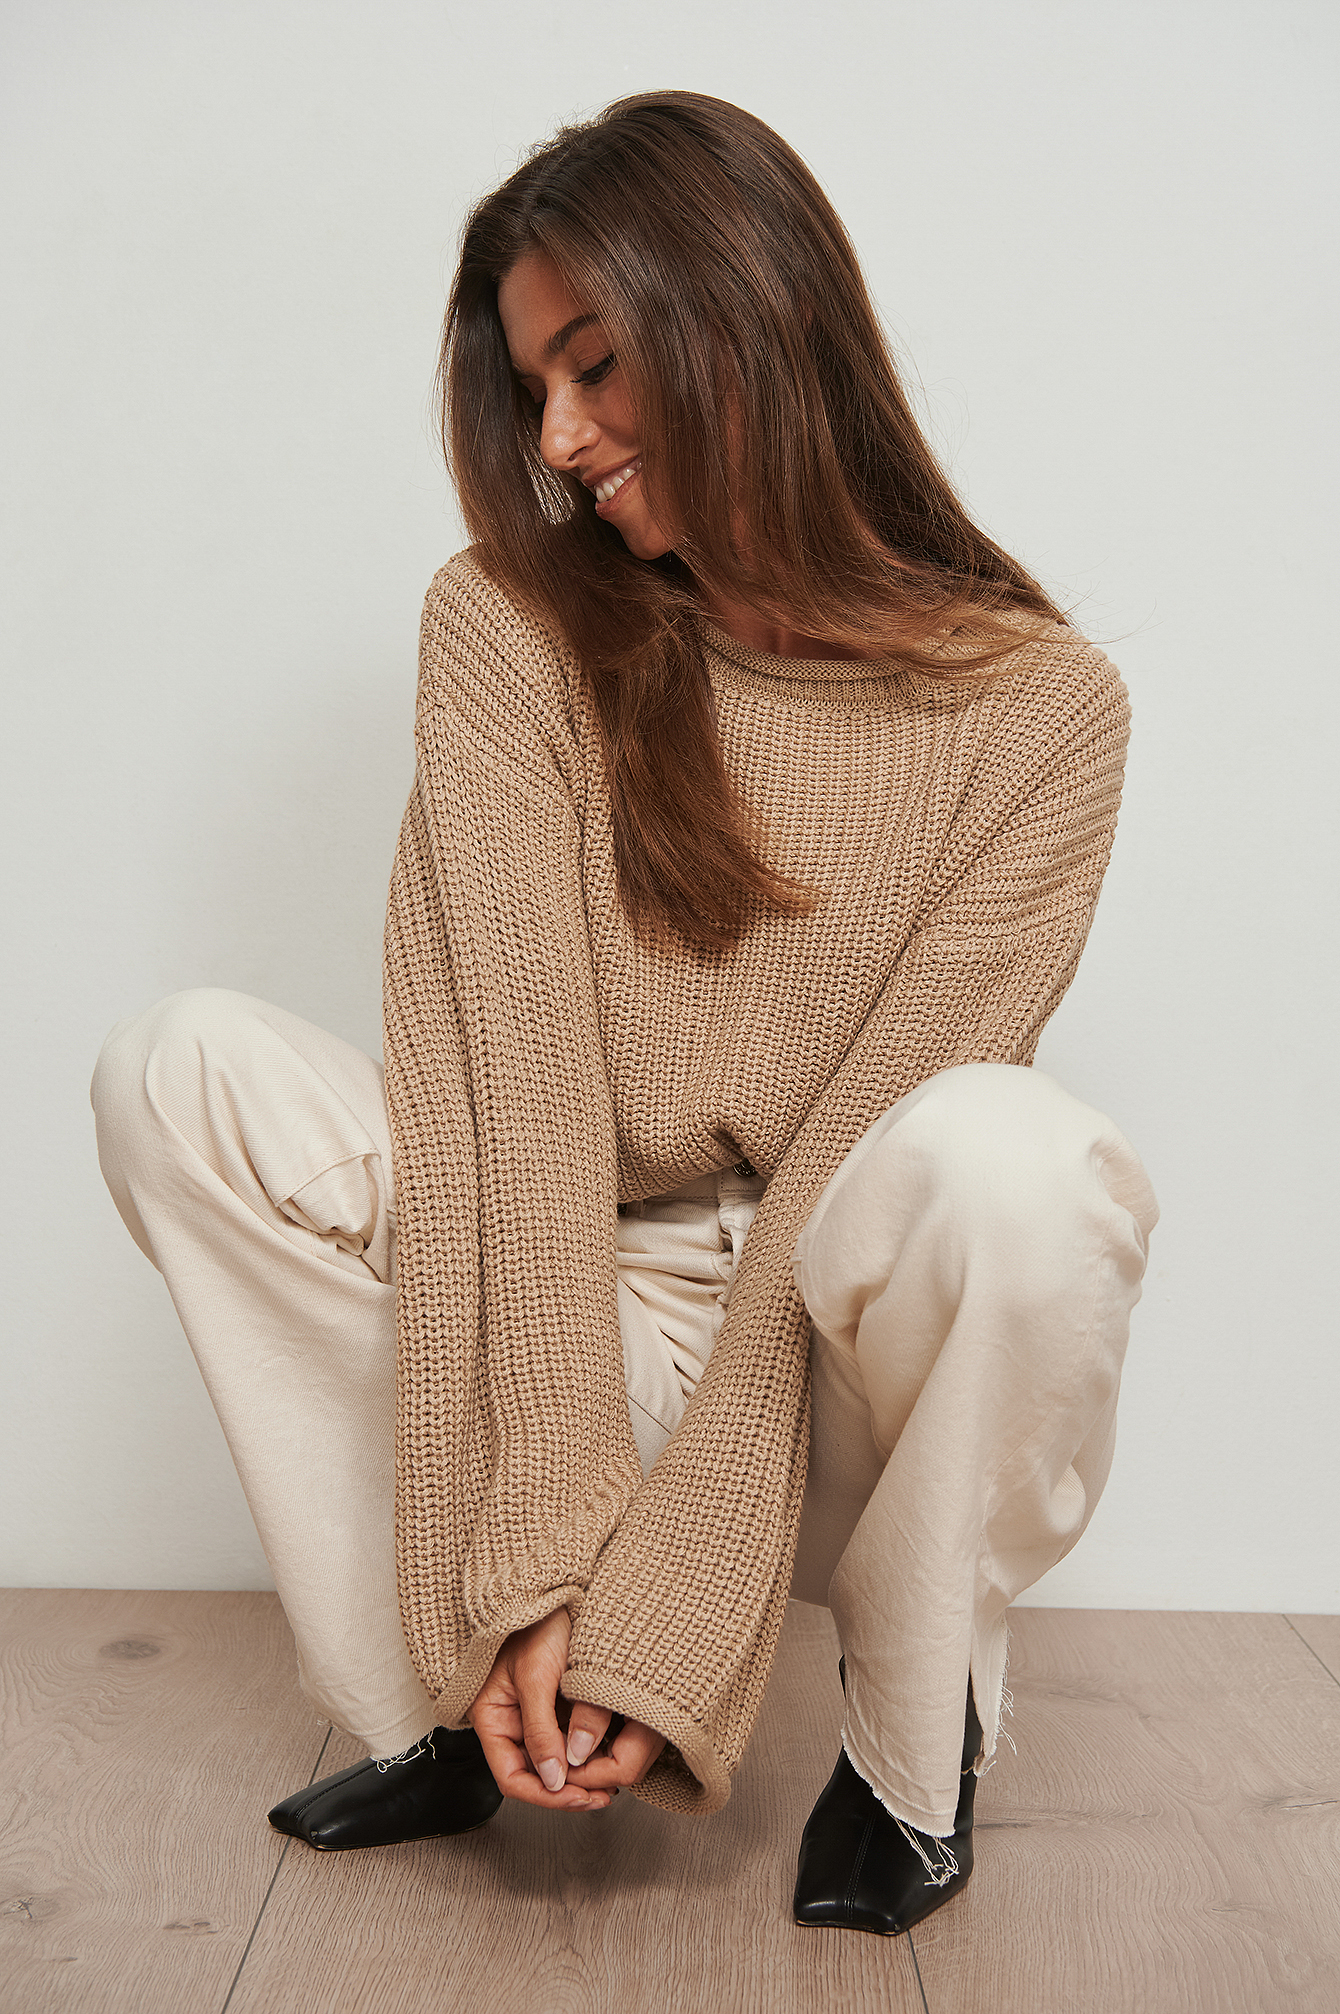 Cropped Boat Neck Knitted Sweater Outfit.